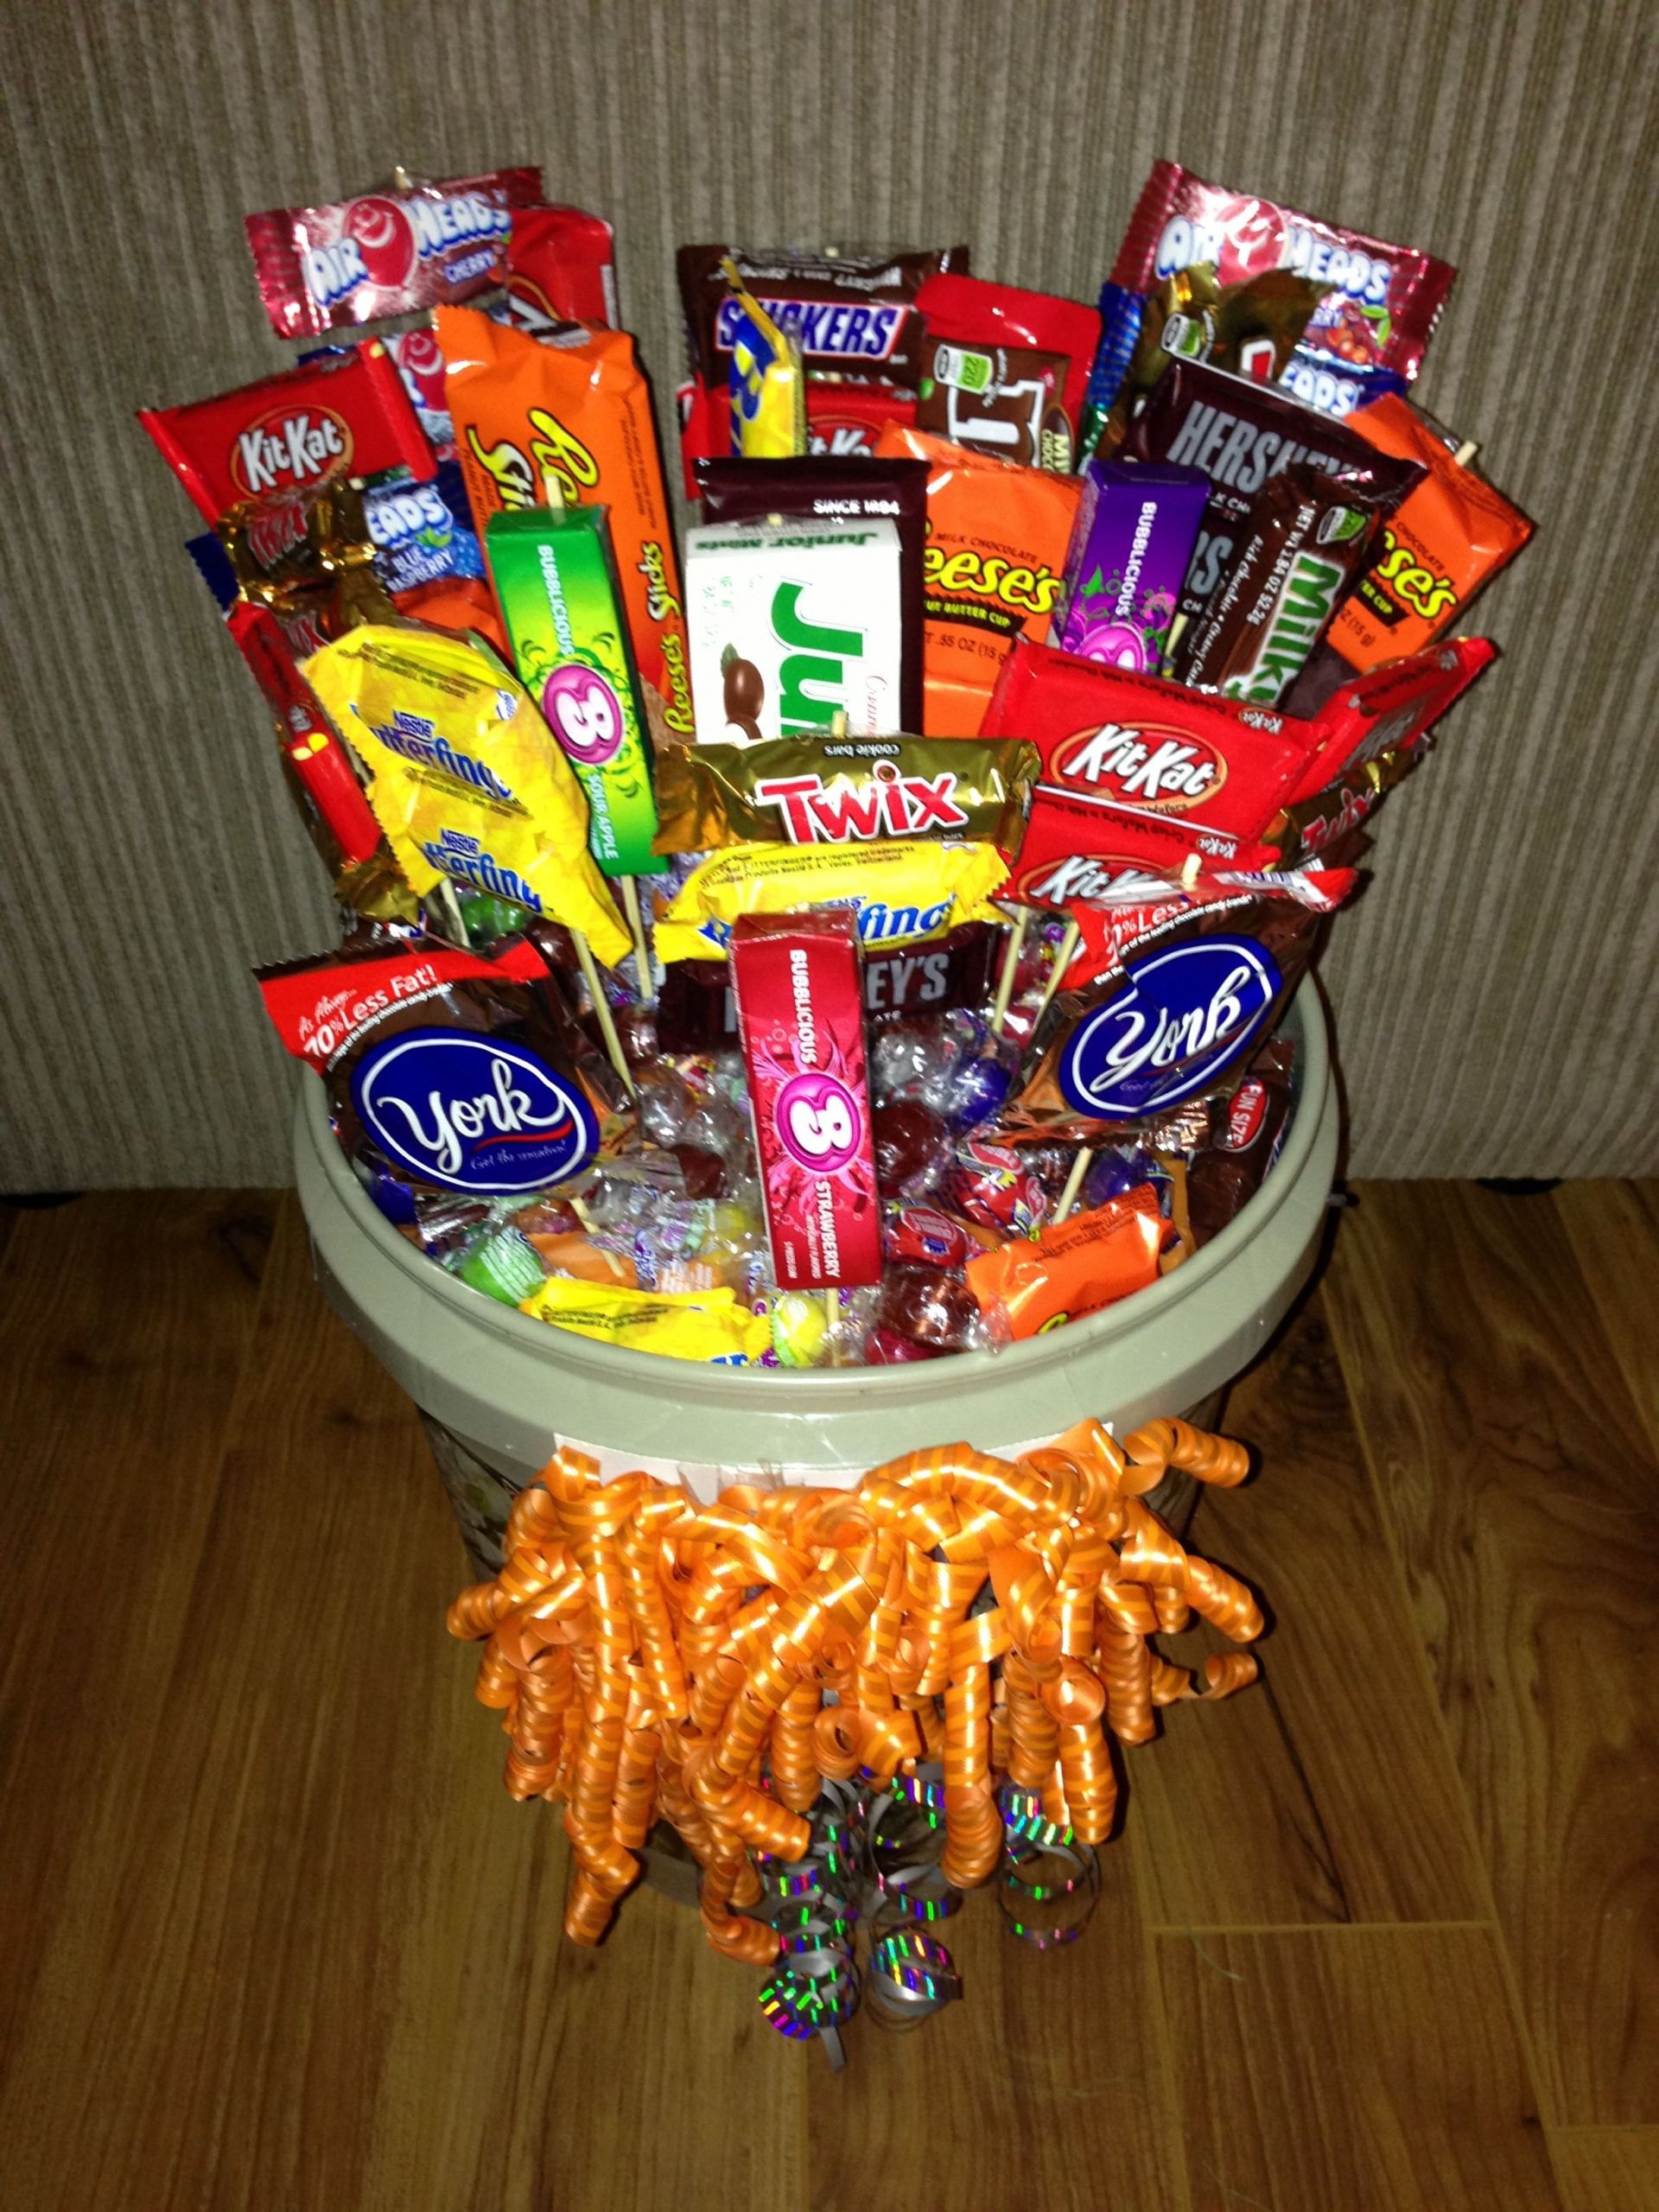 16th Birthday Gift Ideas
 I made this candy bouquet for my son for his 16th Birthday